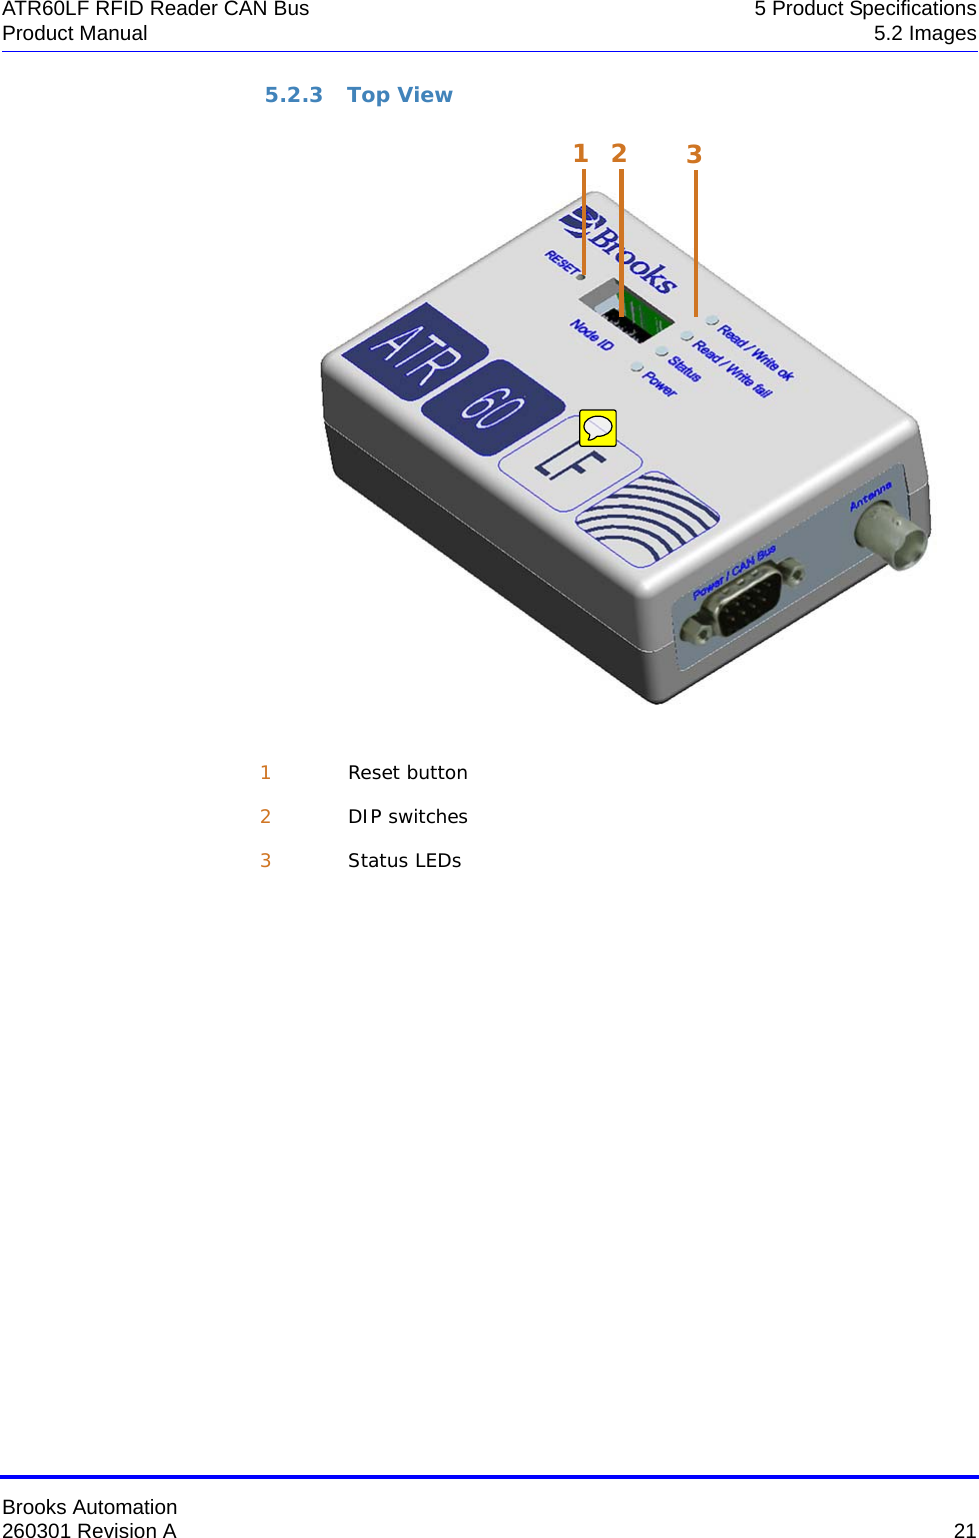 Brooks Automation260301 Revision A  21ATR60LF RFID Reader CAN Bus 5 Product SpecificationsProduct Manual 5.2 Images5.2.3 Top View1Reset button2DIP switches3Status LEDs321